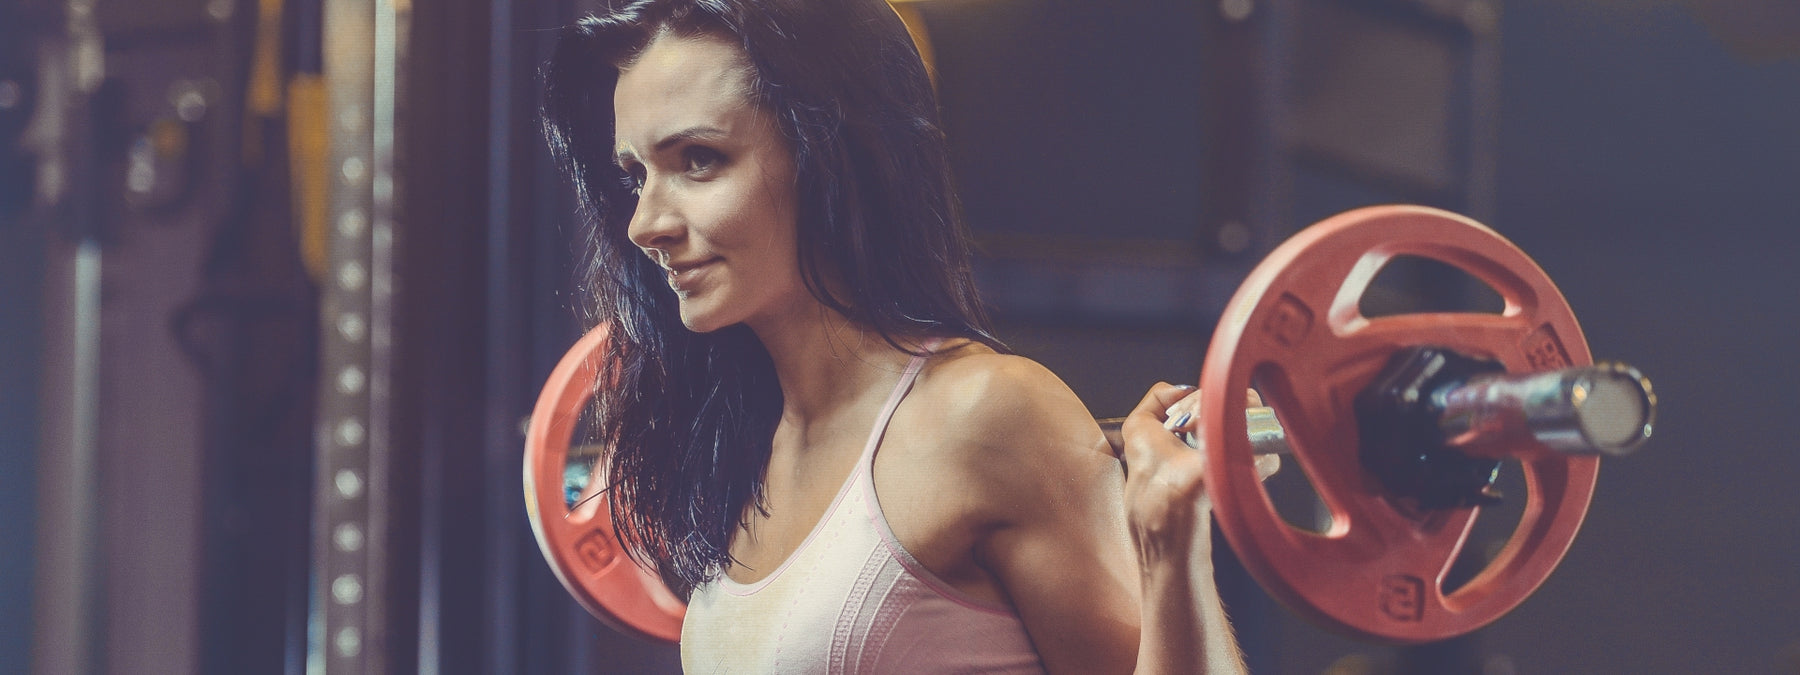 Five Common Lifting Problems for Women